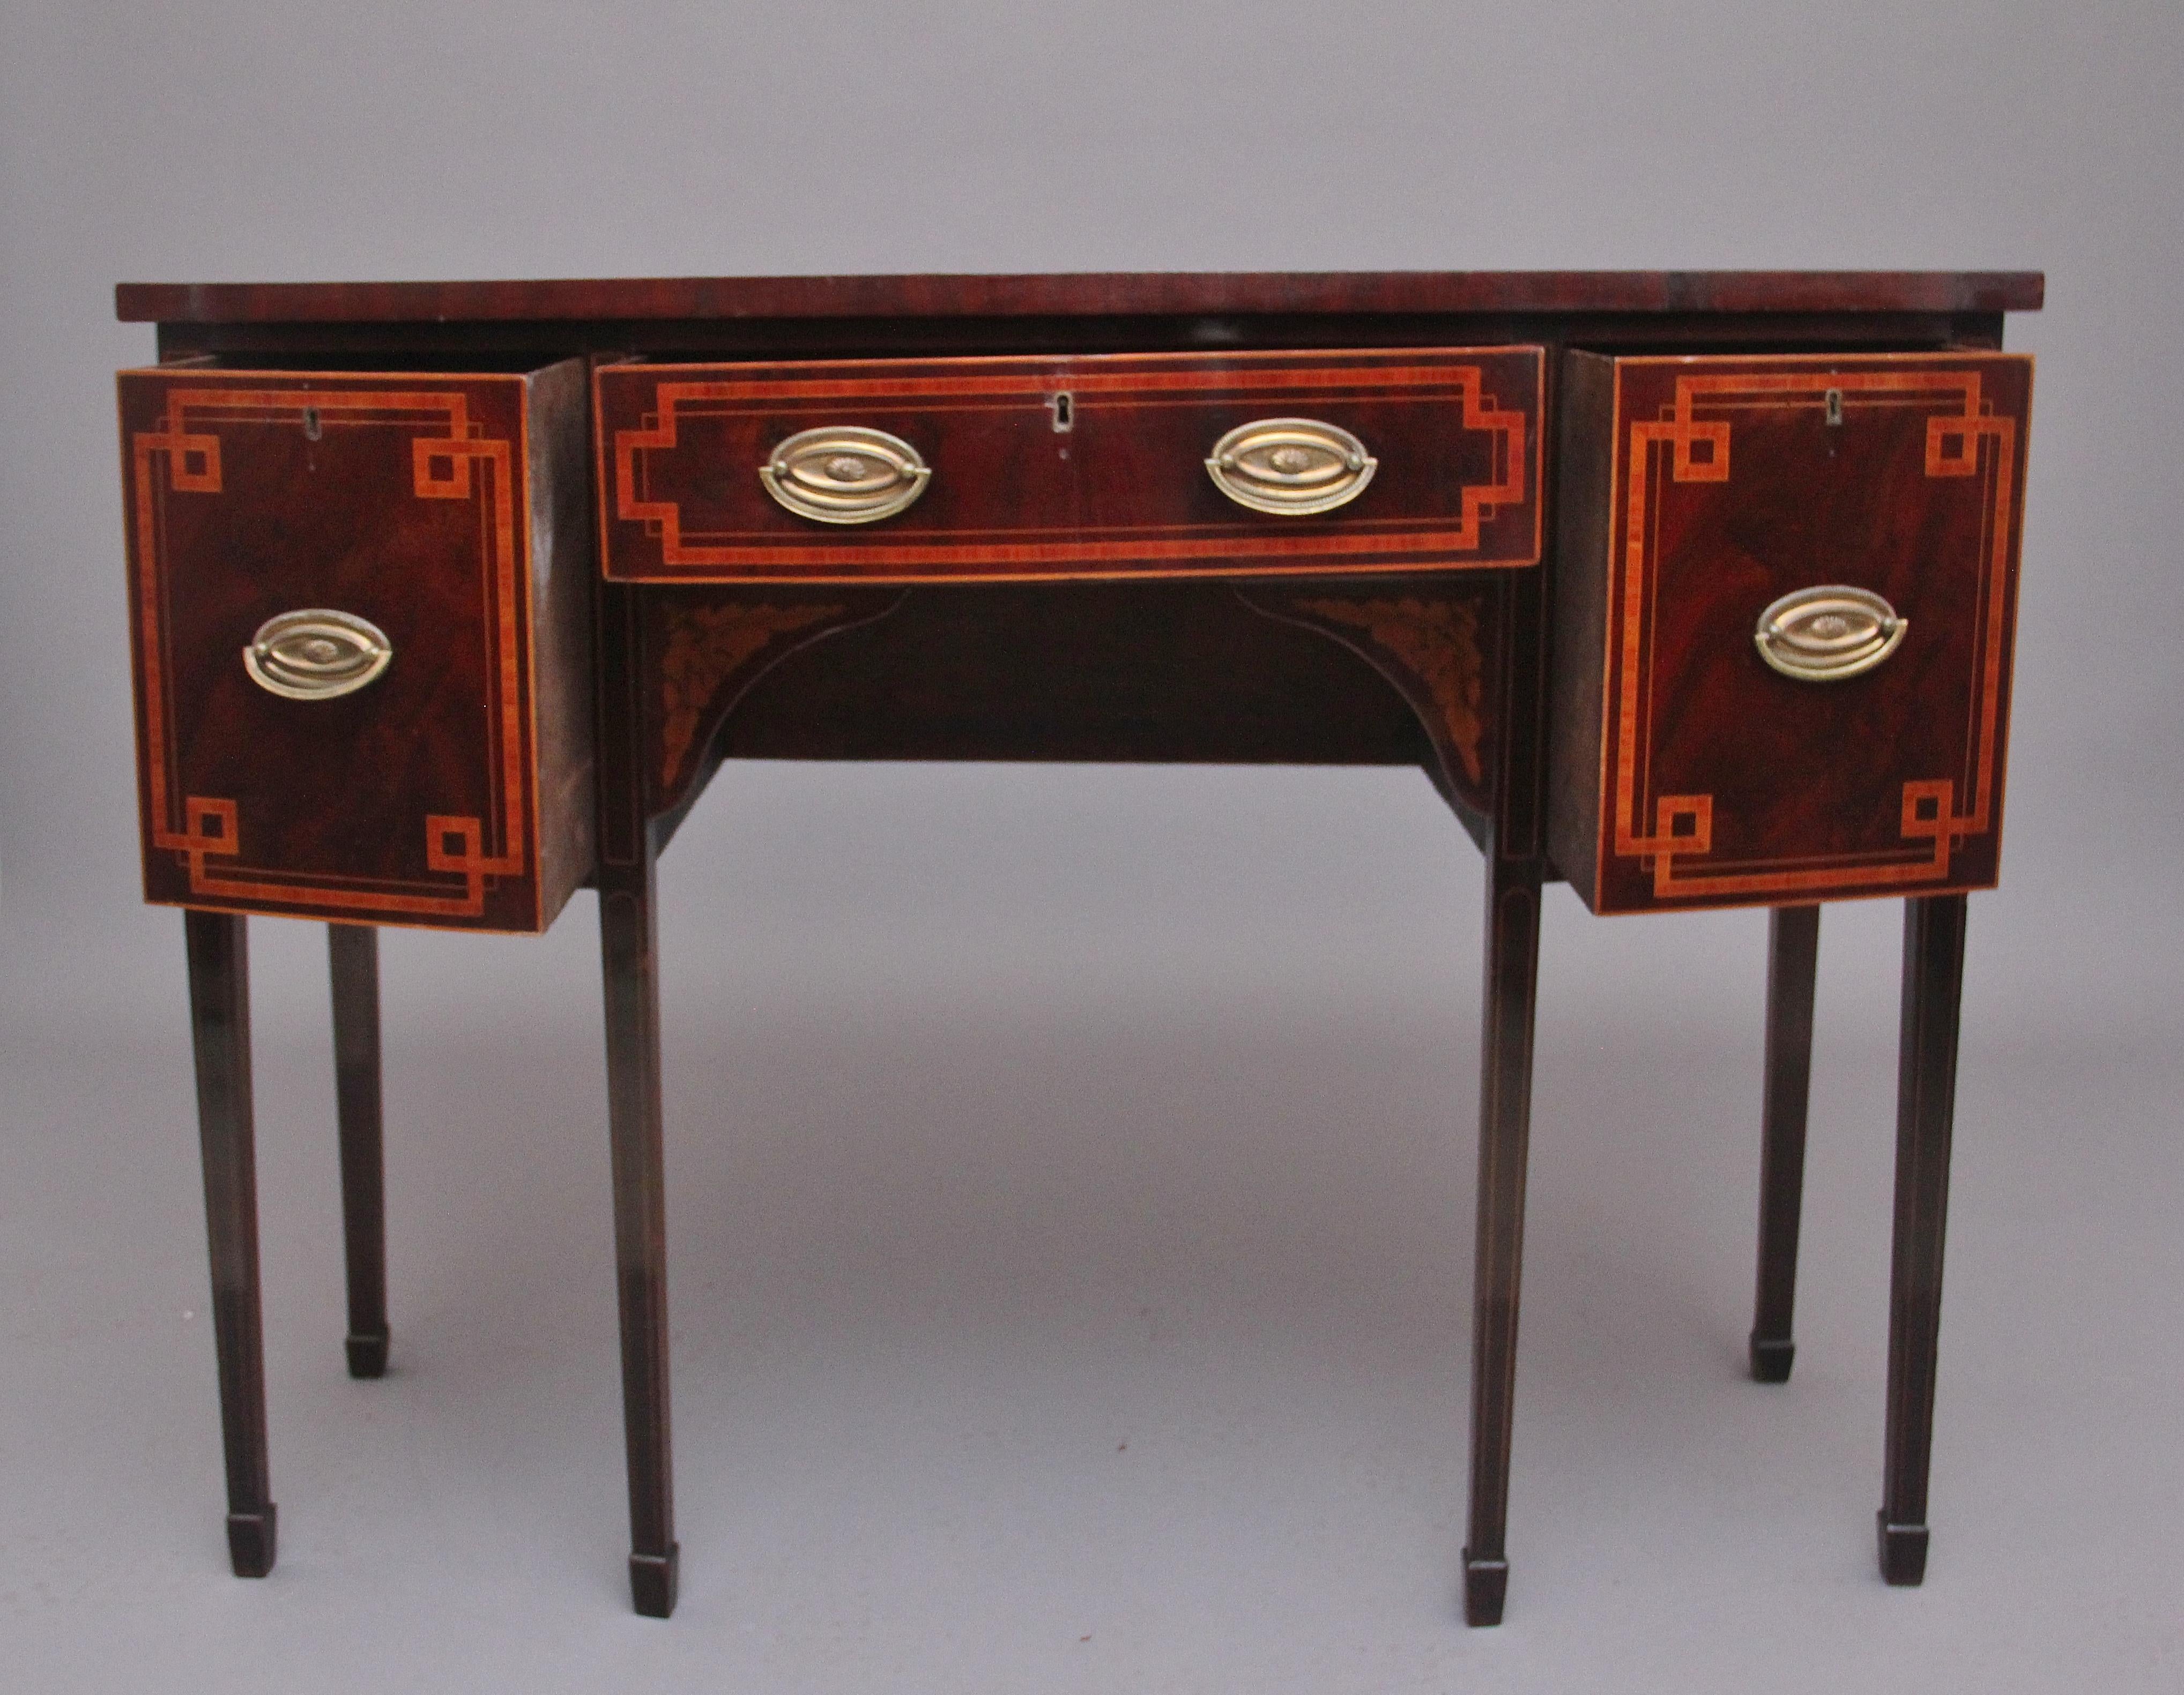 Early 19th century mahogany and inlaid sideboard, having a shaped and crossbanded top above three oak lined drawer with oval brass handles, the drawer fronts having decorative inlay, the shaped central frieze below with floral inlay, supported on